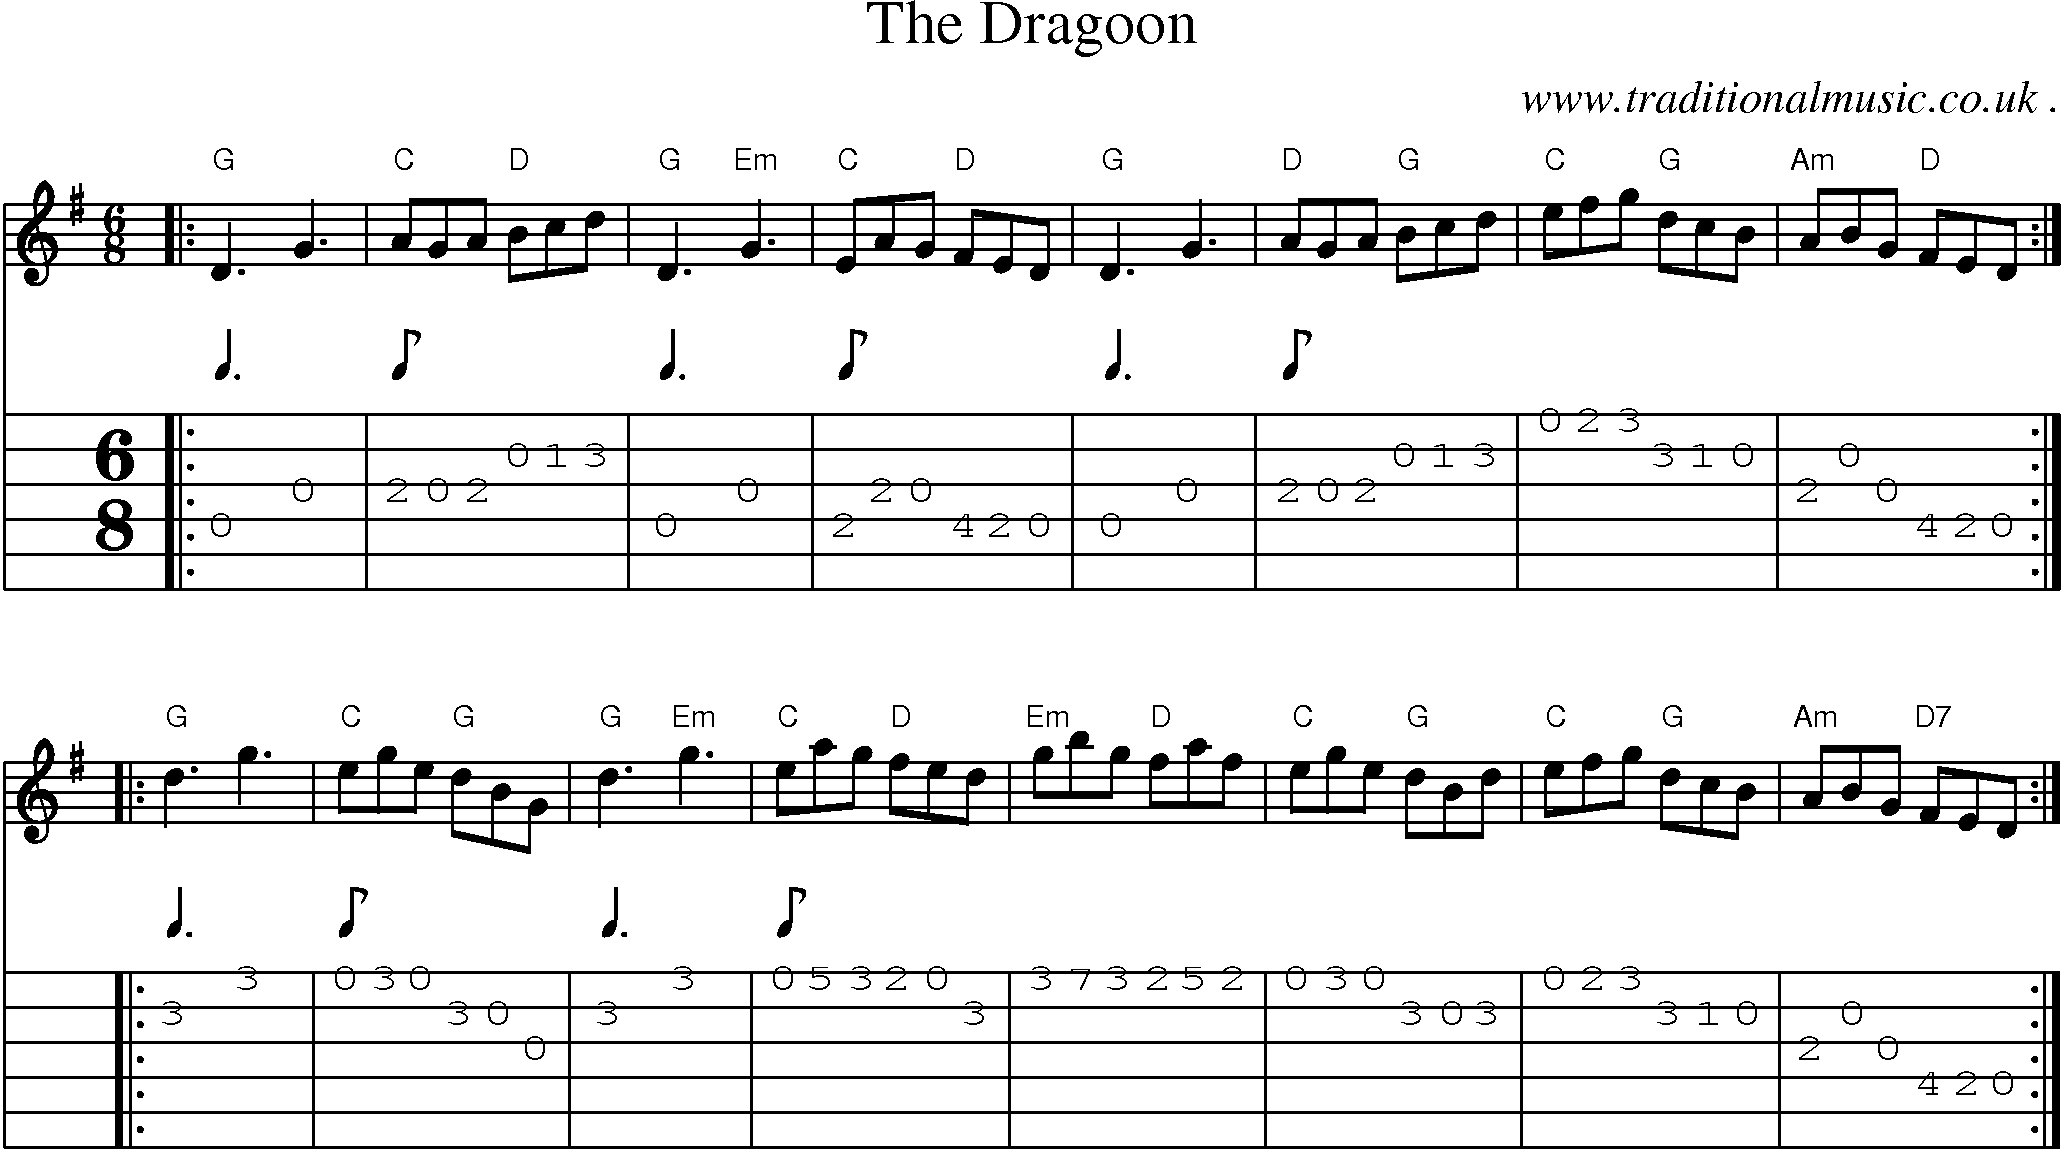 Sheet-music  score, Chords and Guitar Tabs for The Dragoon